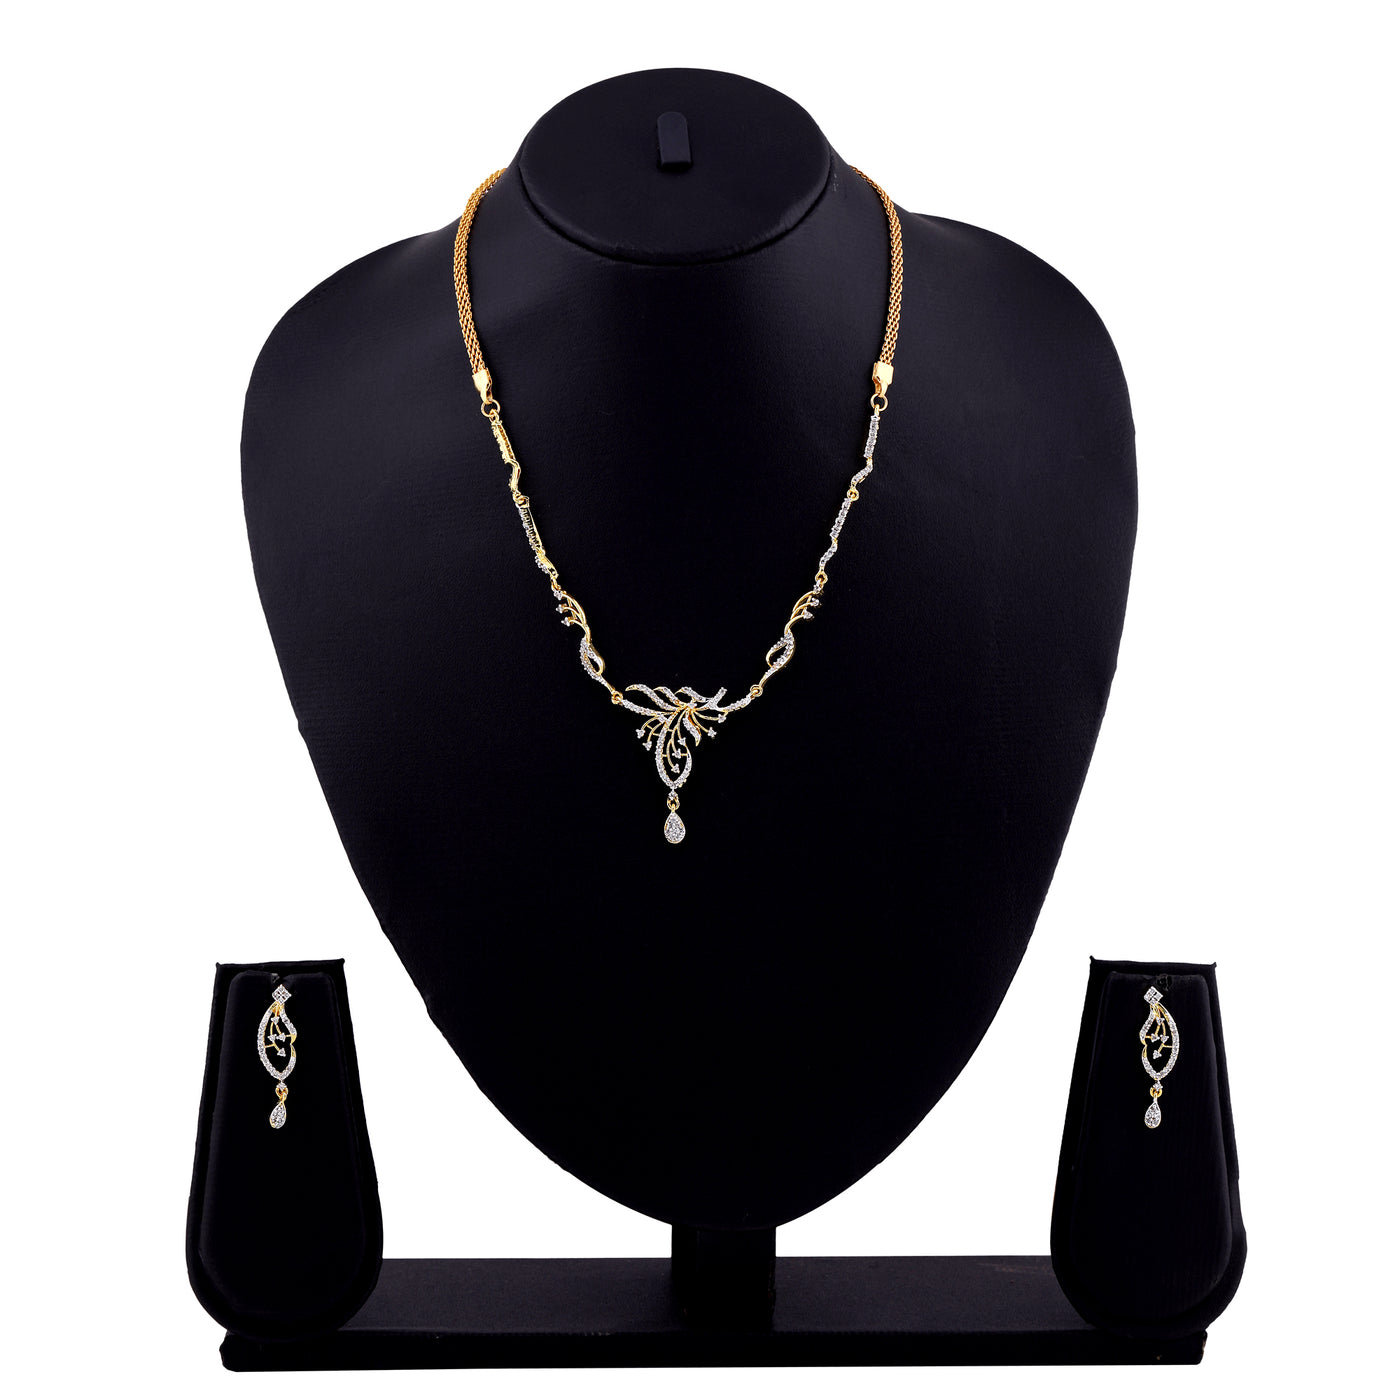 Estele 24 Kt Gold Plated Oval American Diamond Necklace Set for Women